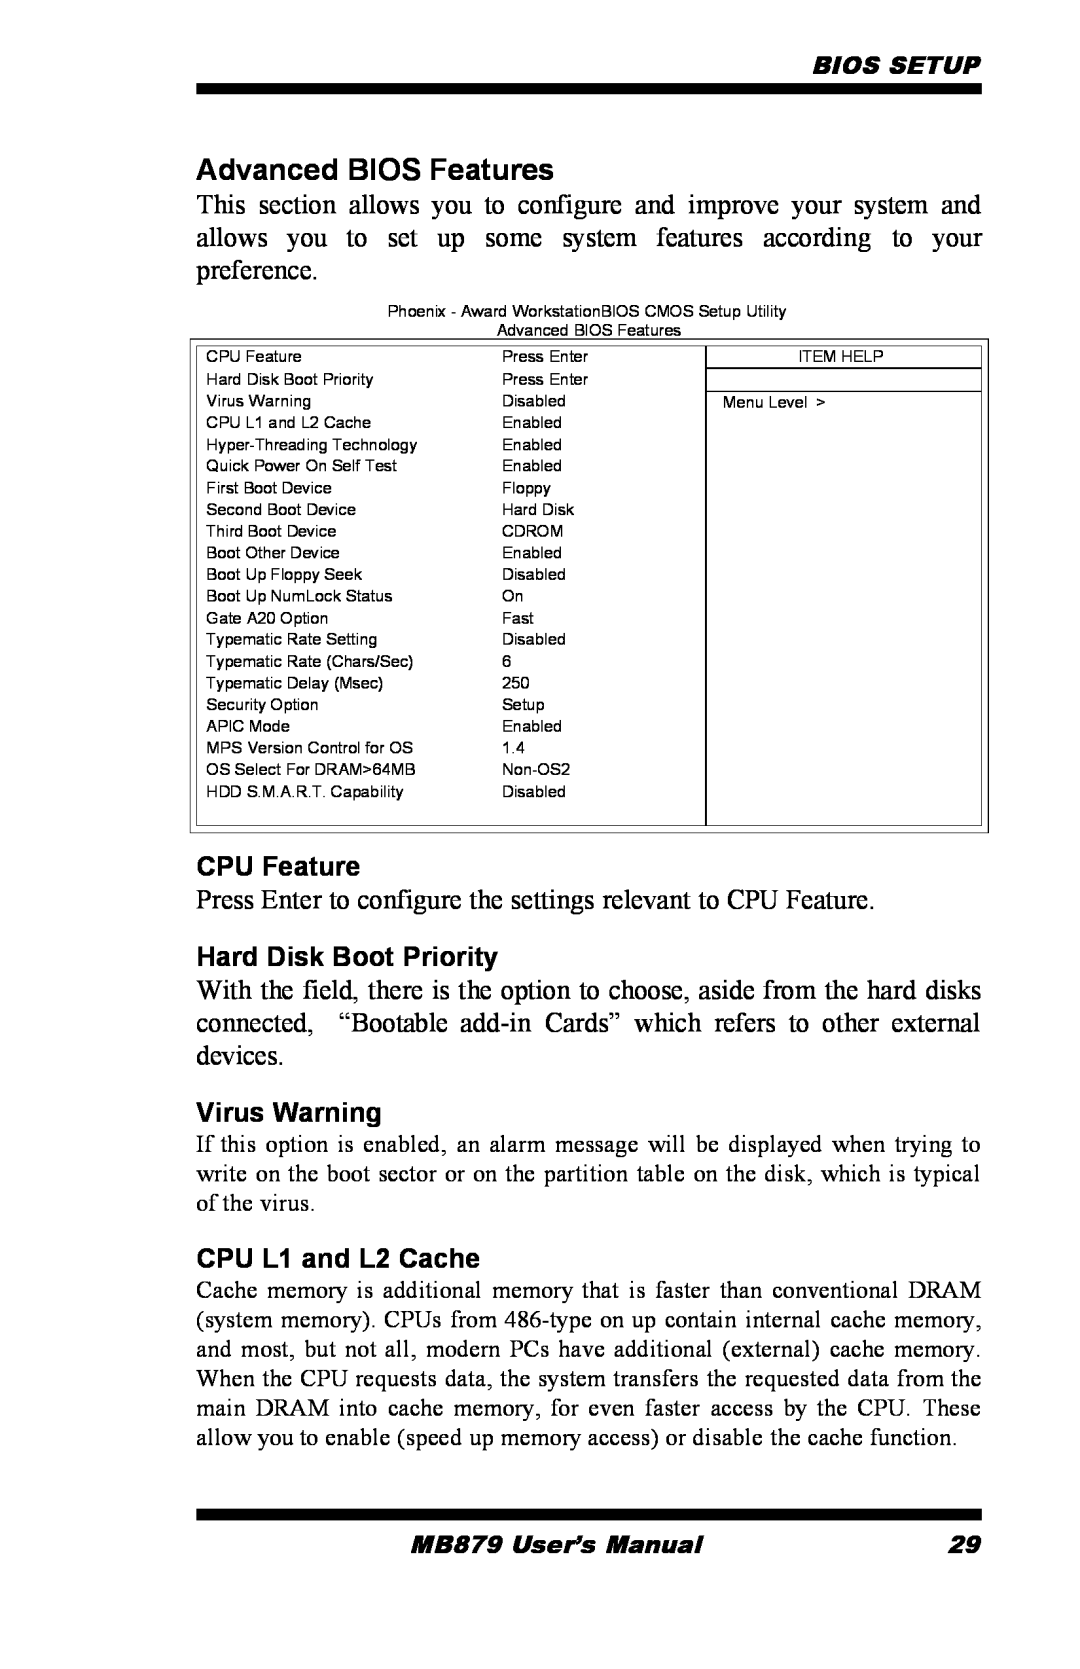 Intel MB879 user manual Advanced BIOS Features, CPU Feature, Hard Disk Boot Priority, Virus Warning, CPU L1 and L2 Cache 